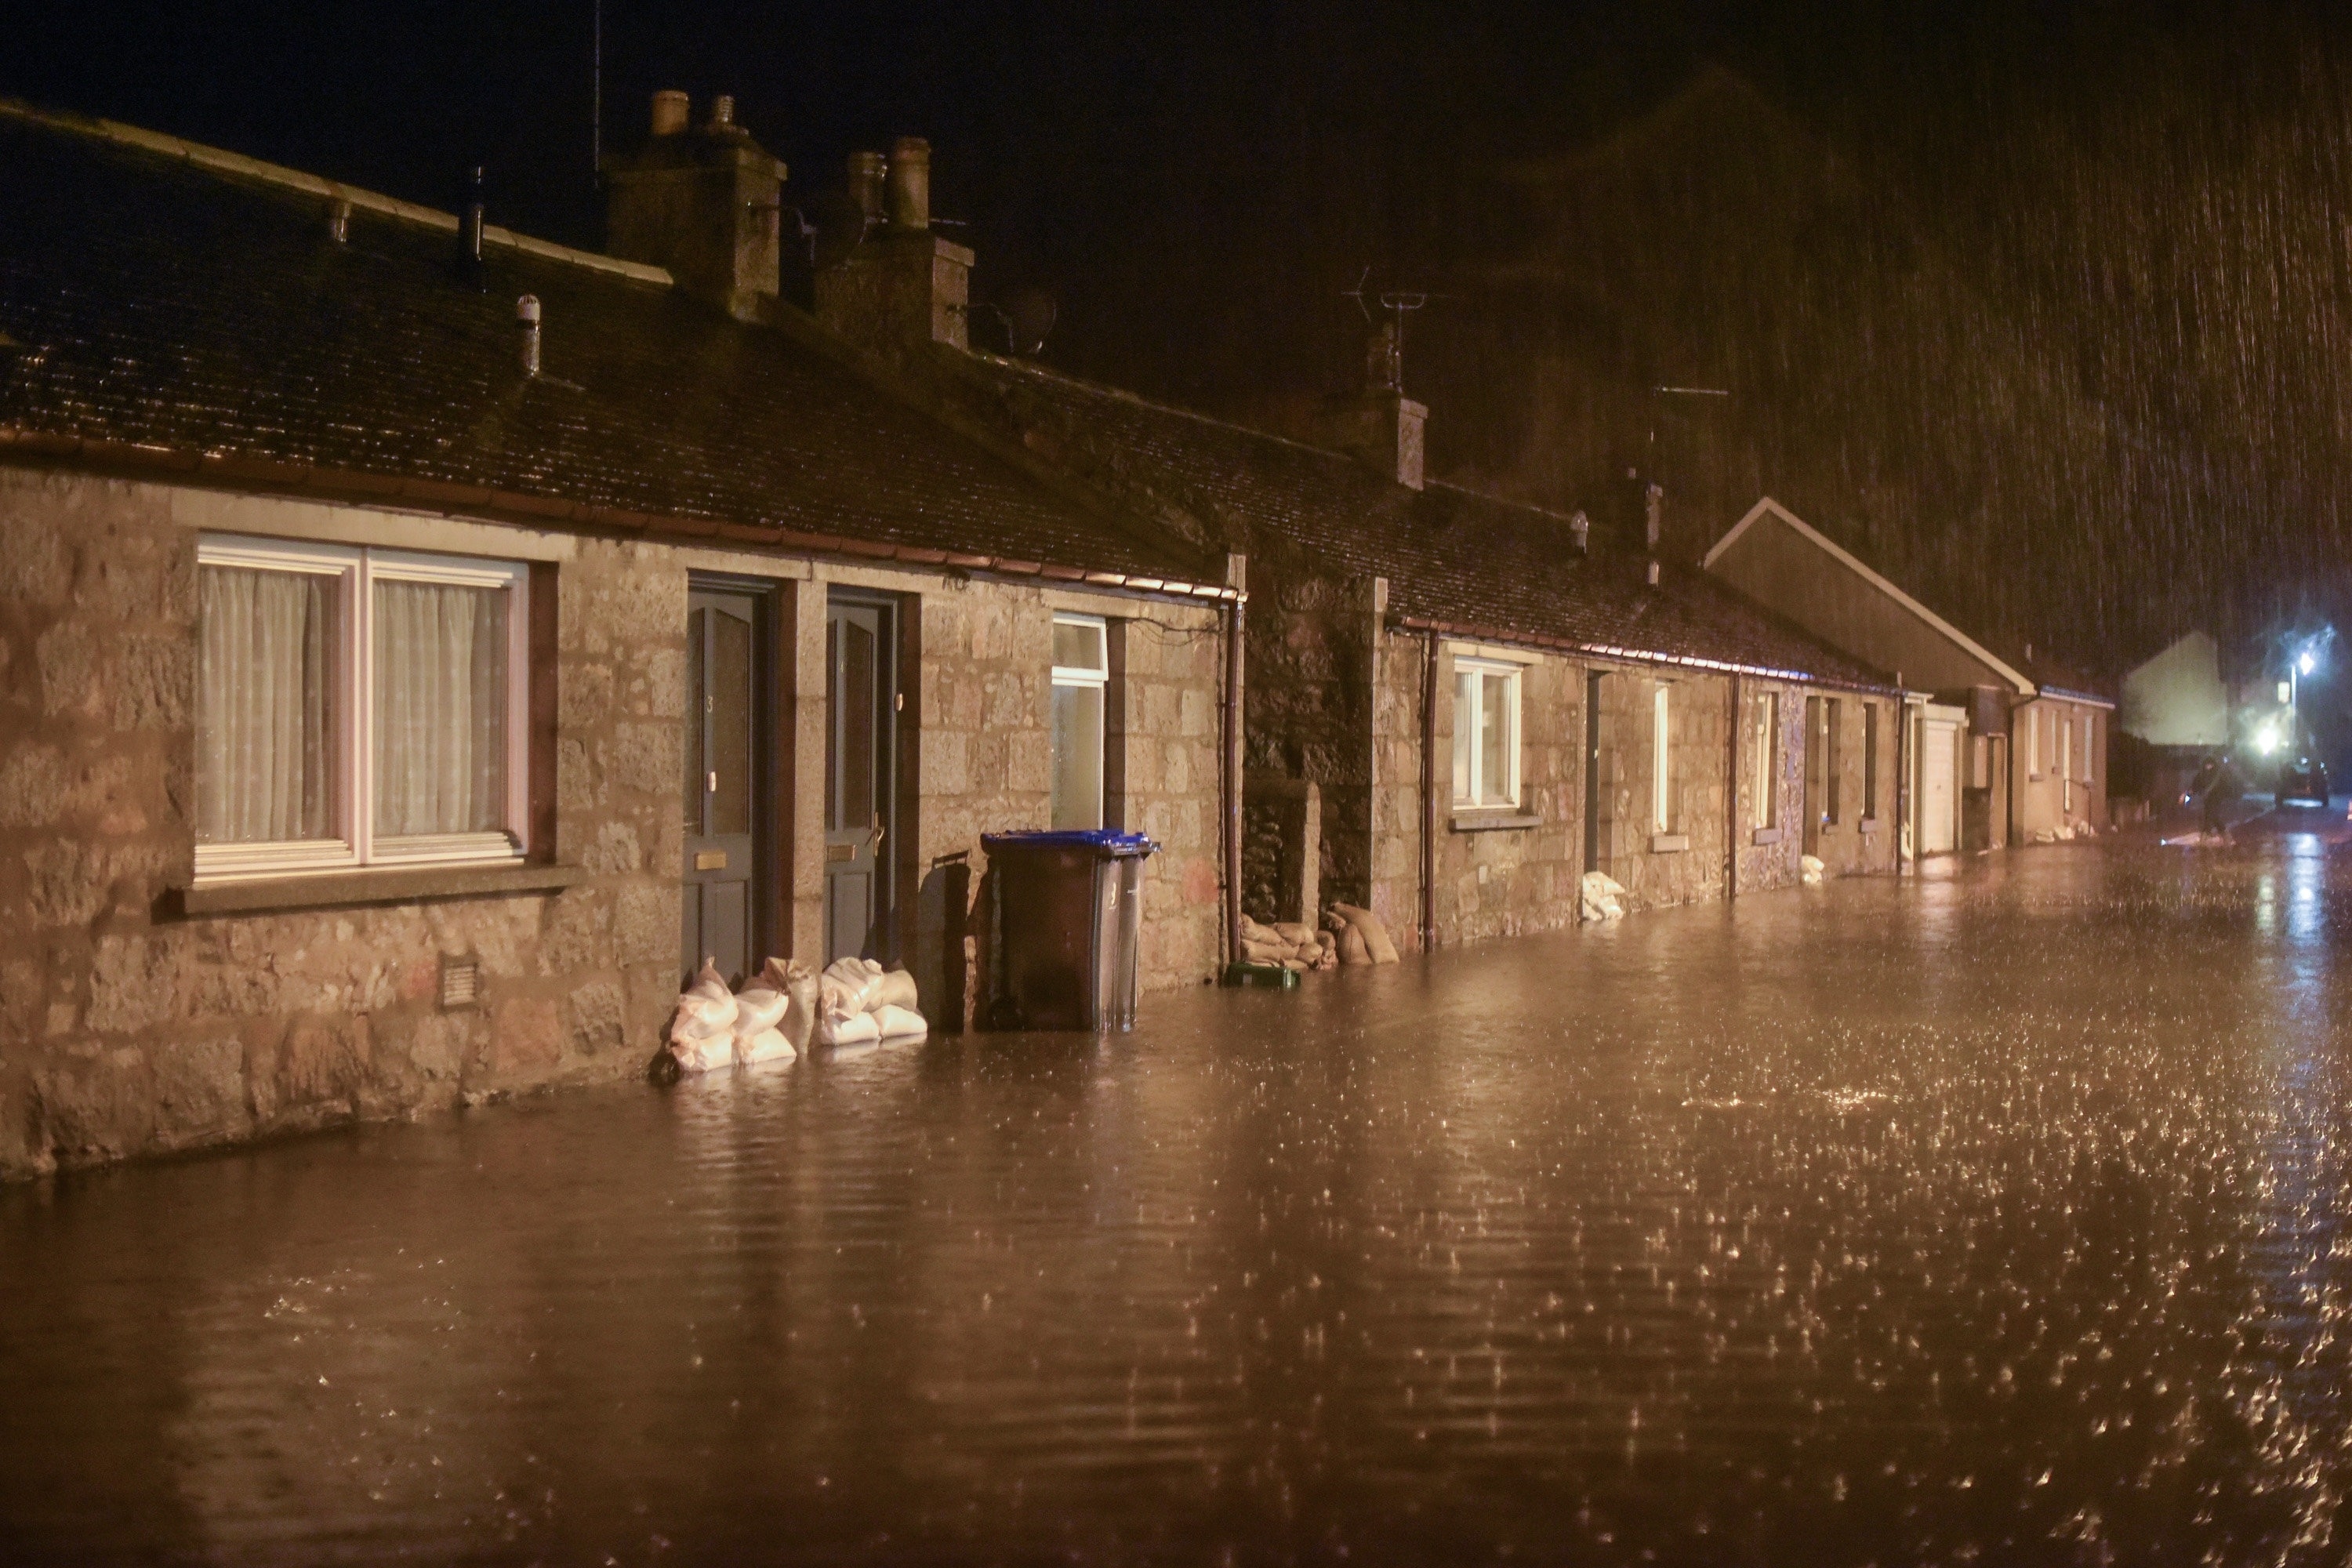 Houses in the Port Elphinstone area of Inverurie, Aberdeenshire begin to experience flooding after the River Don burst its banks on January 07 2016. Scottish Envornmental Protection Agency (SEPA) have issued two severe flood warnings for both Inverurie and Kintore, both in Aberdeenshire.